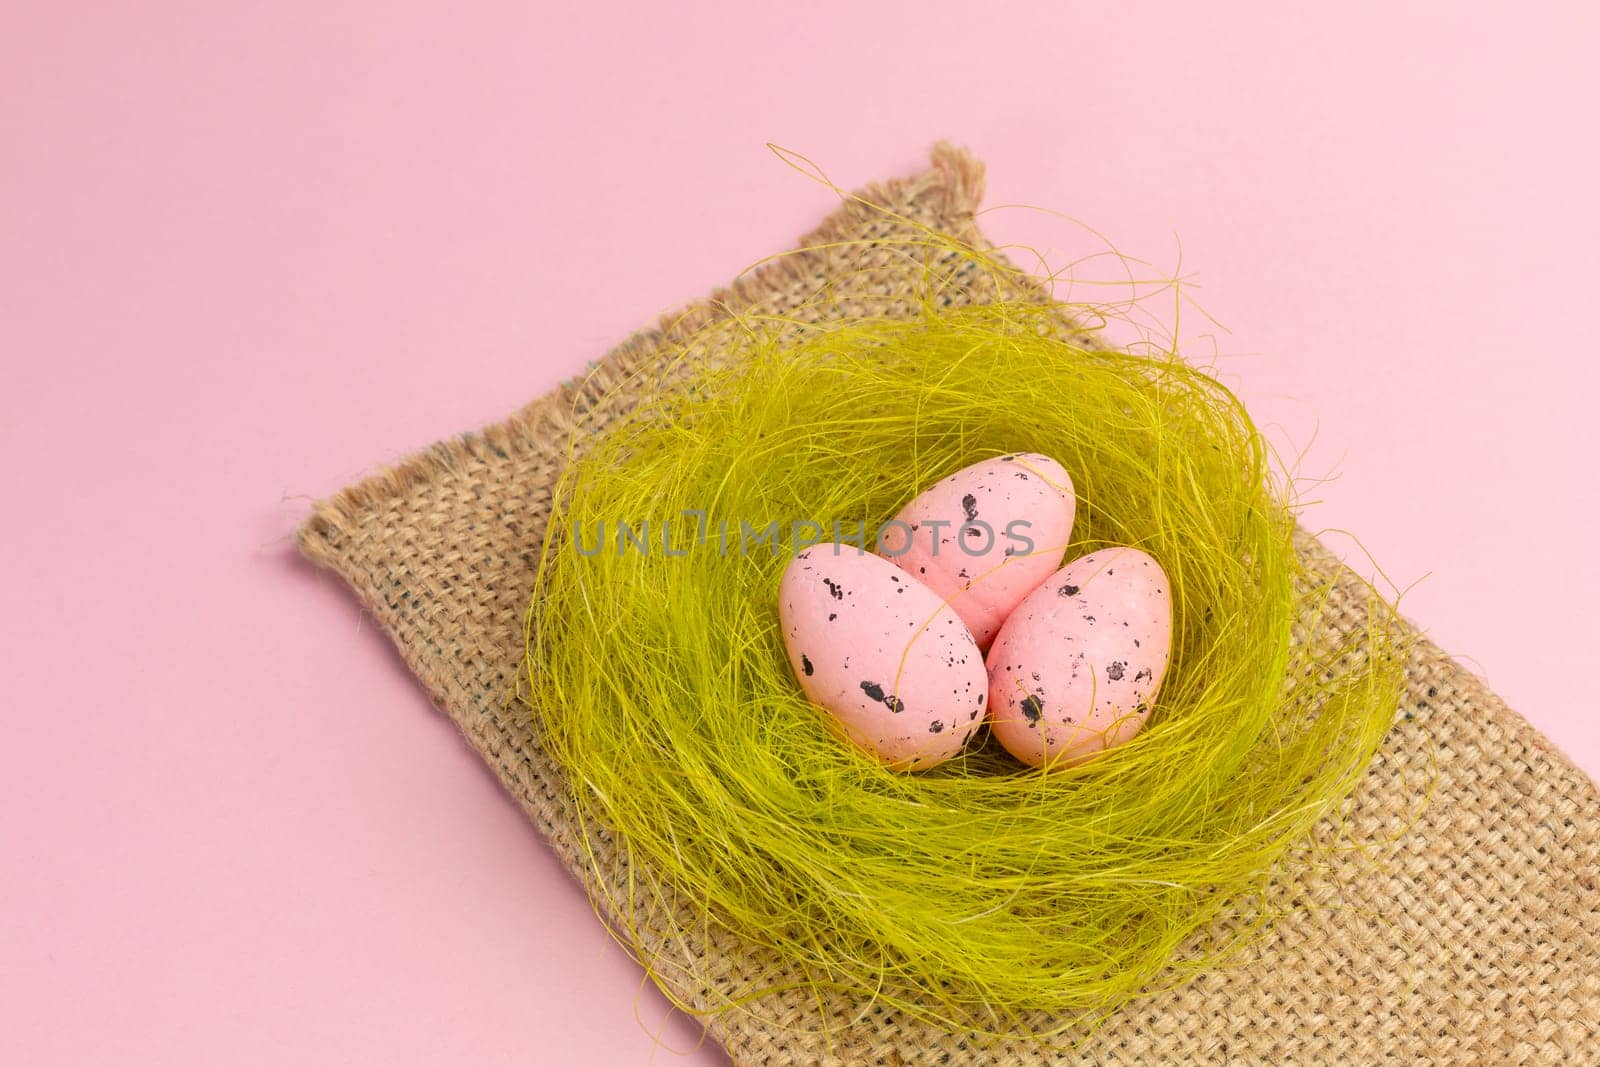 Nest with colored Easter eggs on the sackcloth bag with the pink background. Top view.